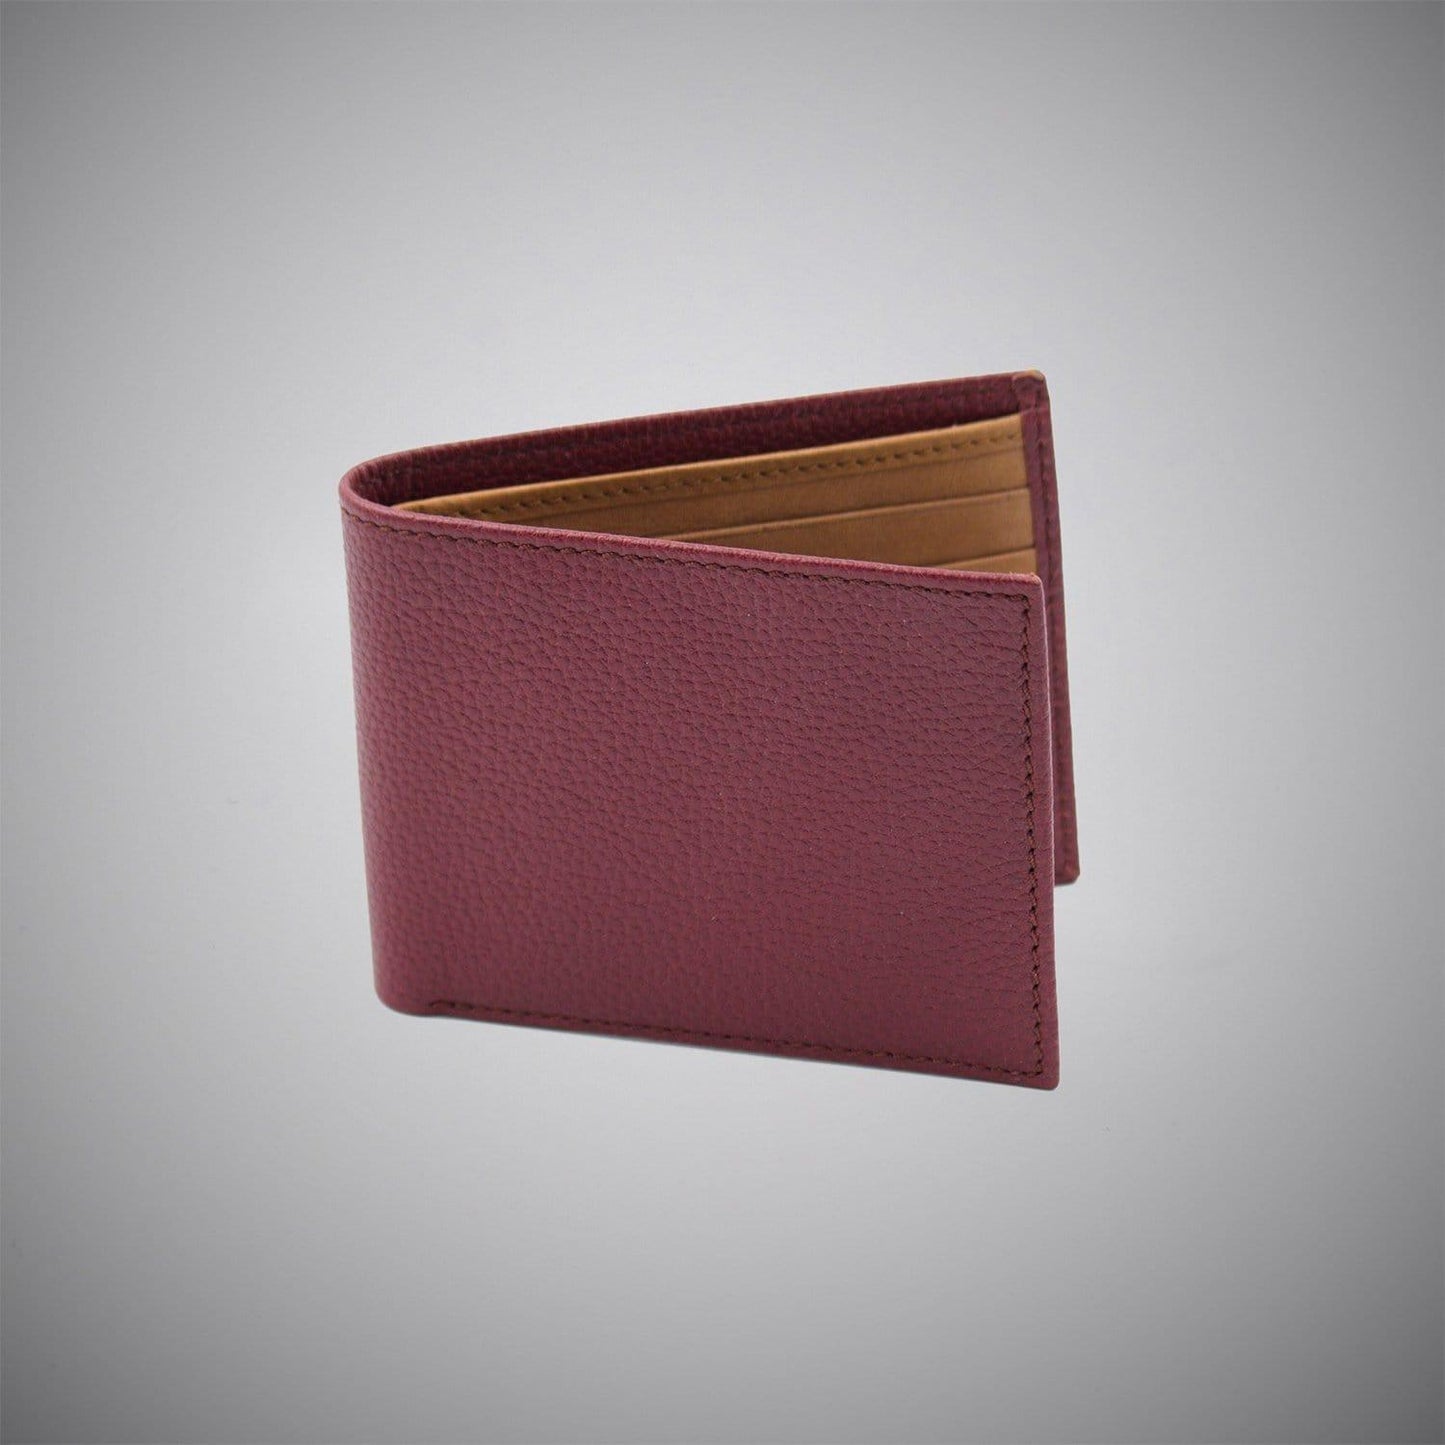 Burgundy Embossed Calf Leather Wallet With Tan Suede Interior - Just White Shirts